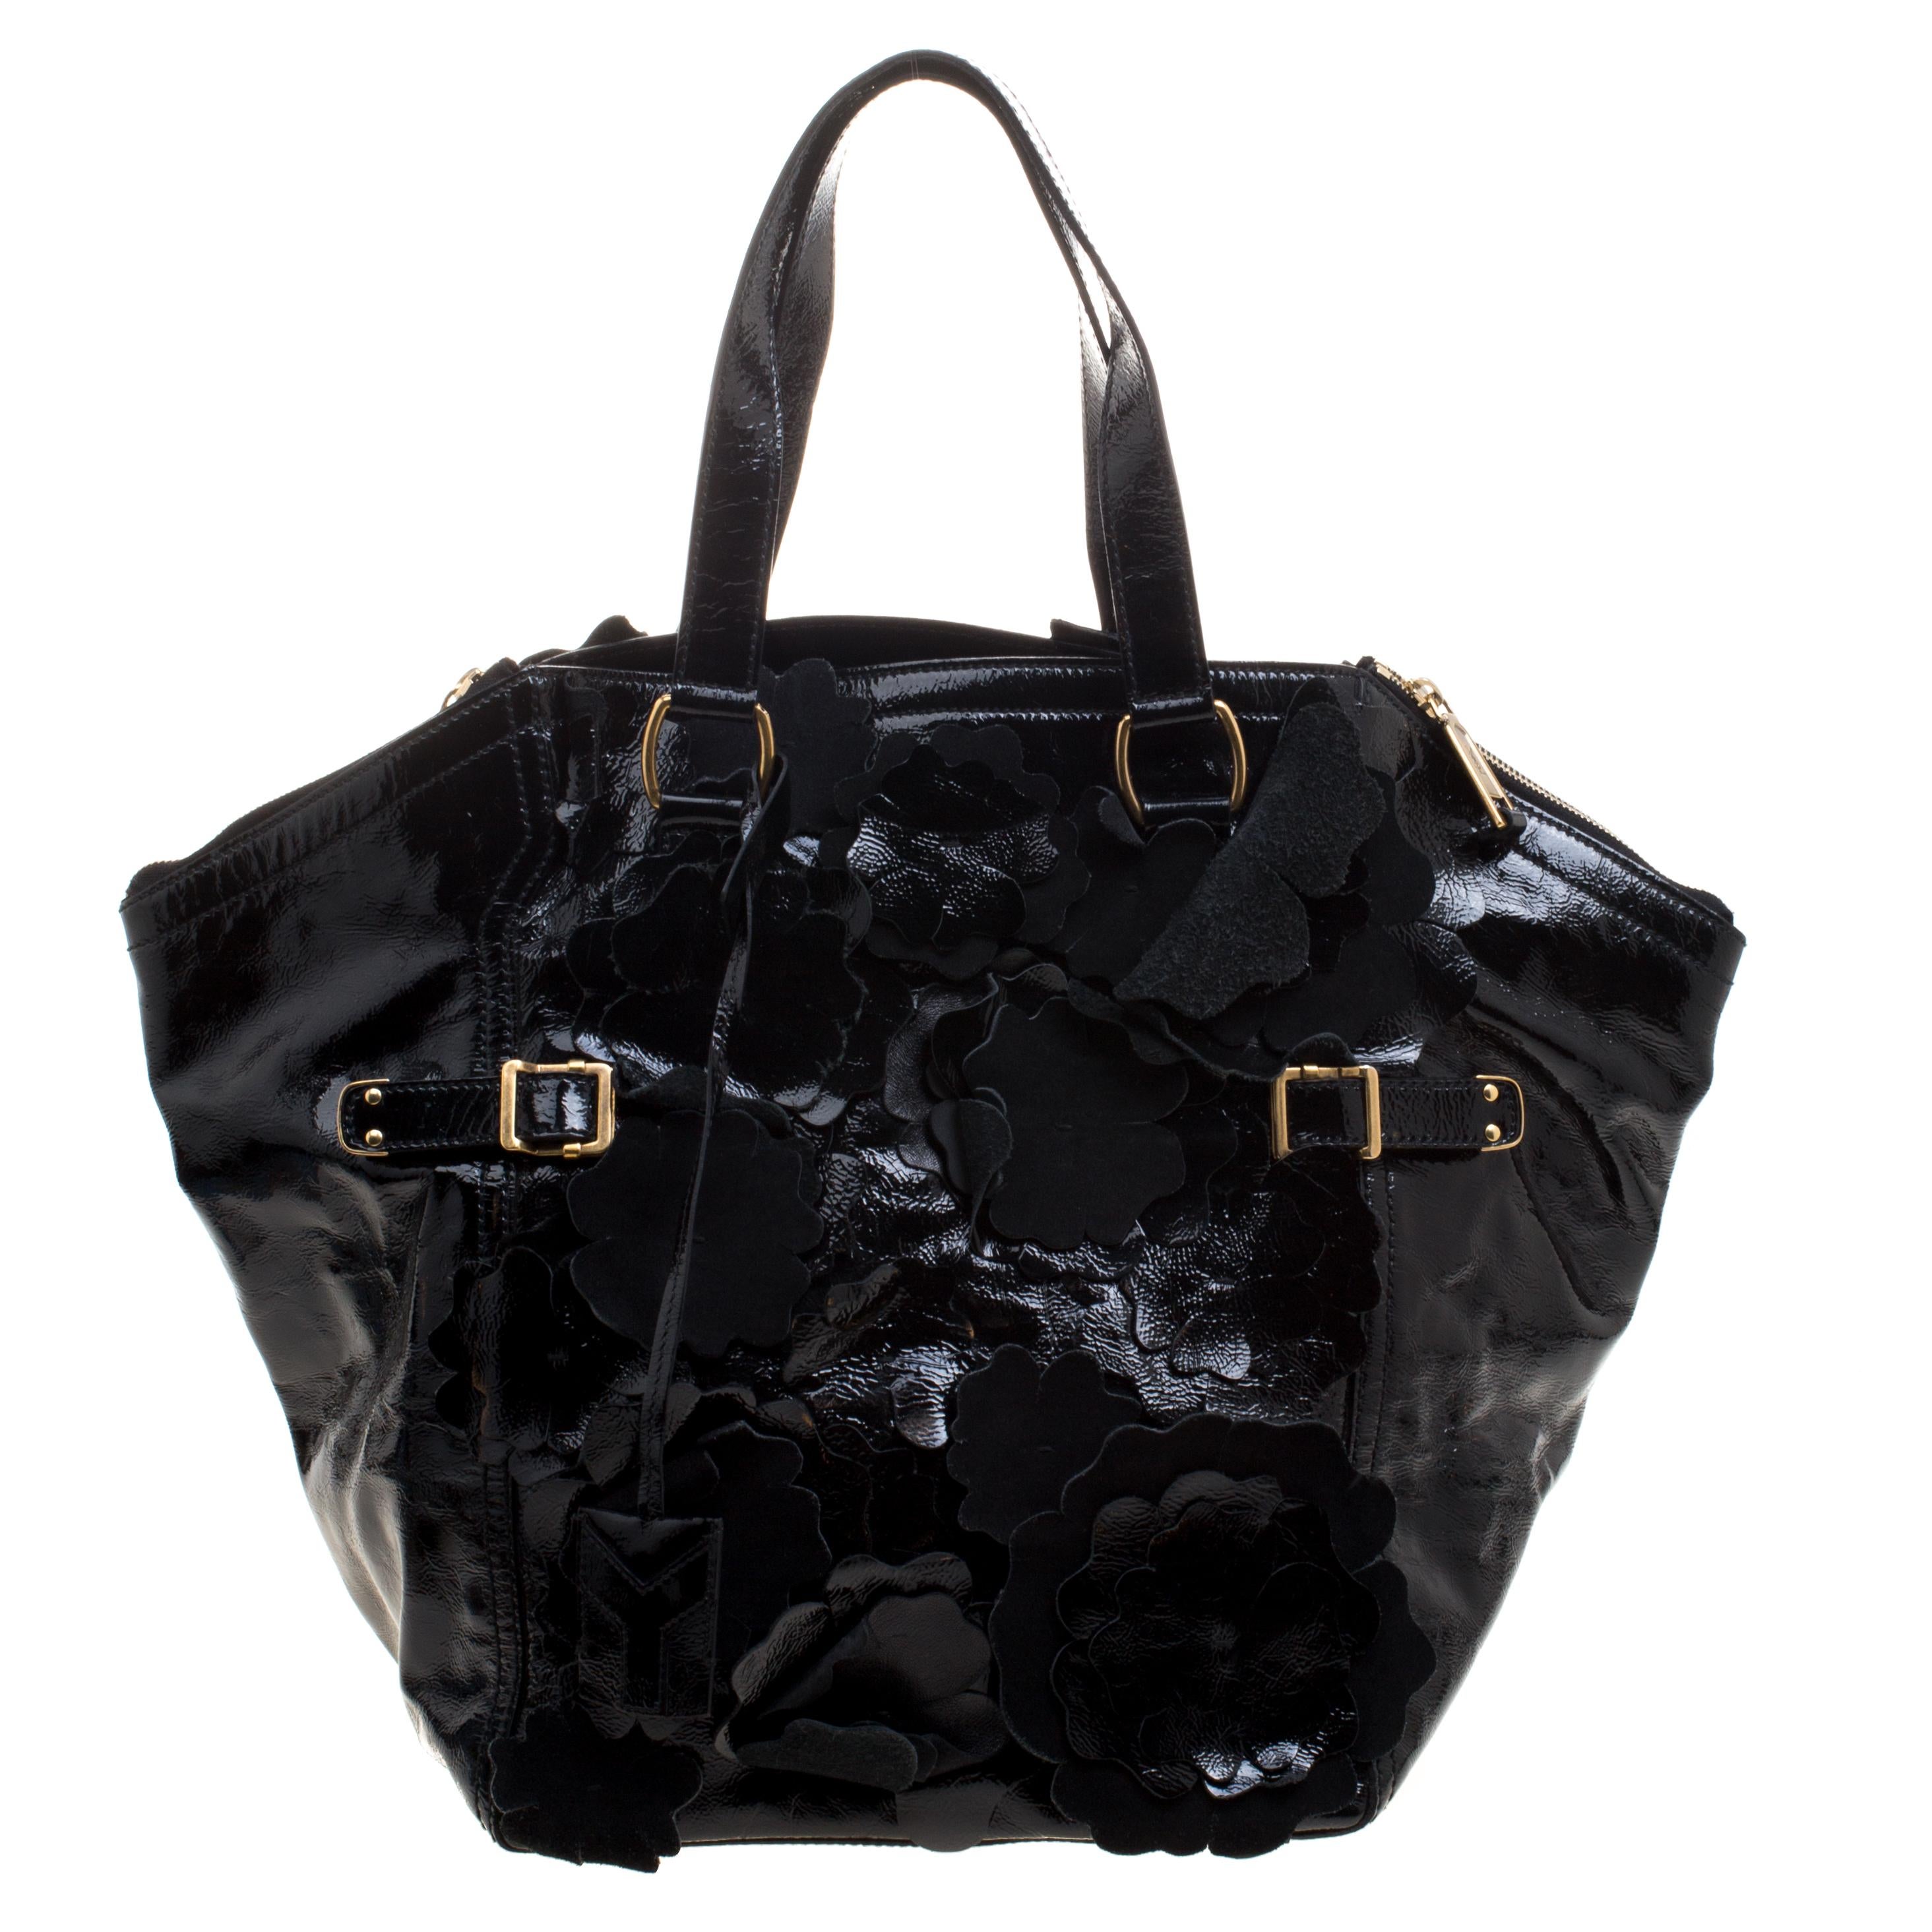 Featuring a unique shape, this Saint Laurent Downtown tote is crafted in a black patent leather with floral applique on it that lends it a gorgeous feminine touch. It features a top zipper closure, gold-tone accents and fitted with two flat straps